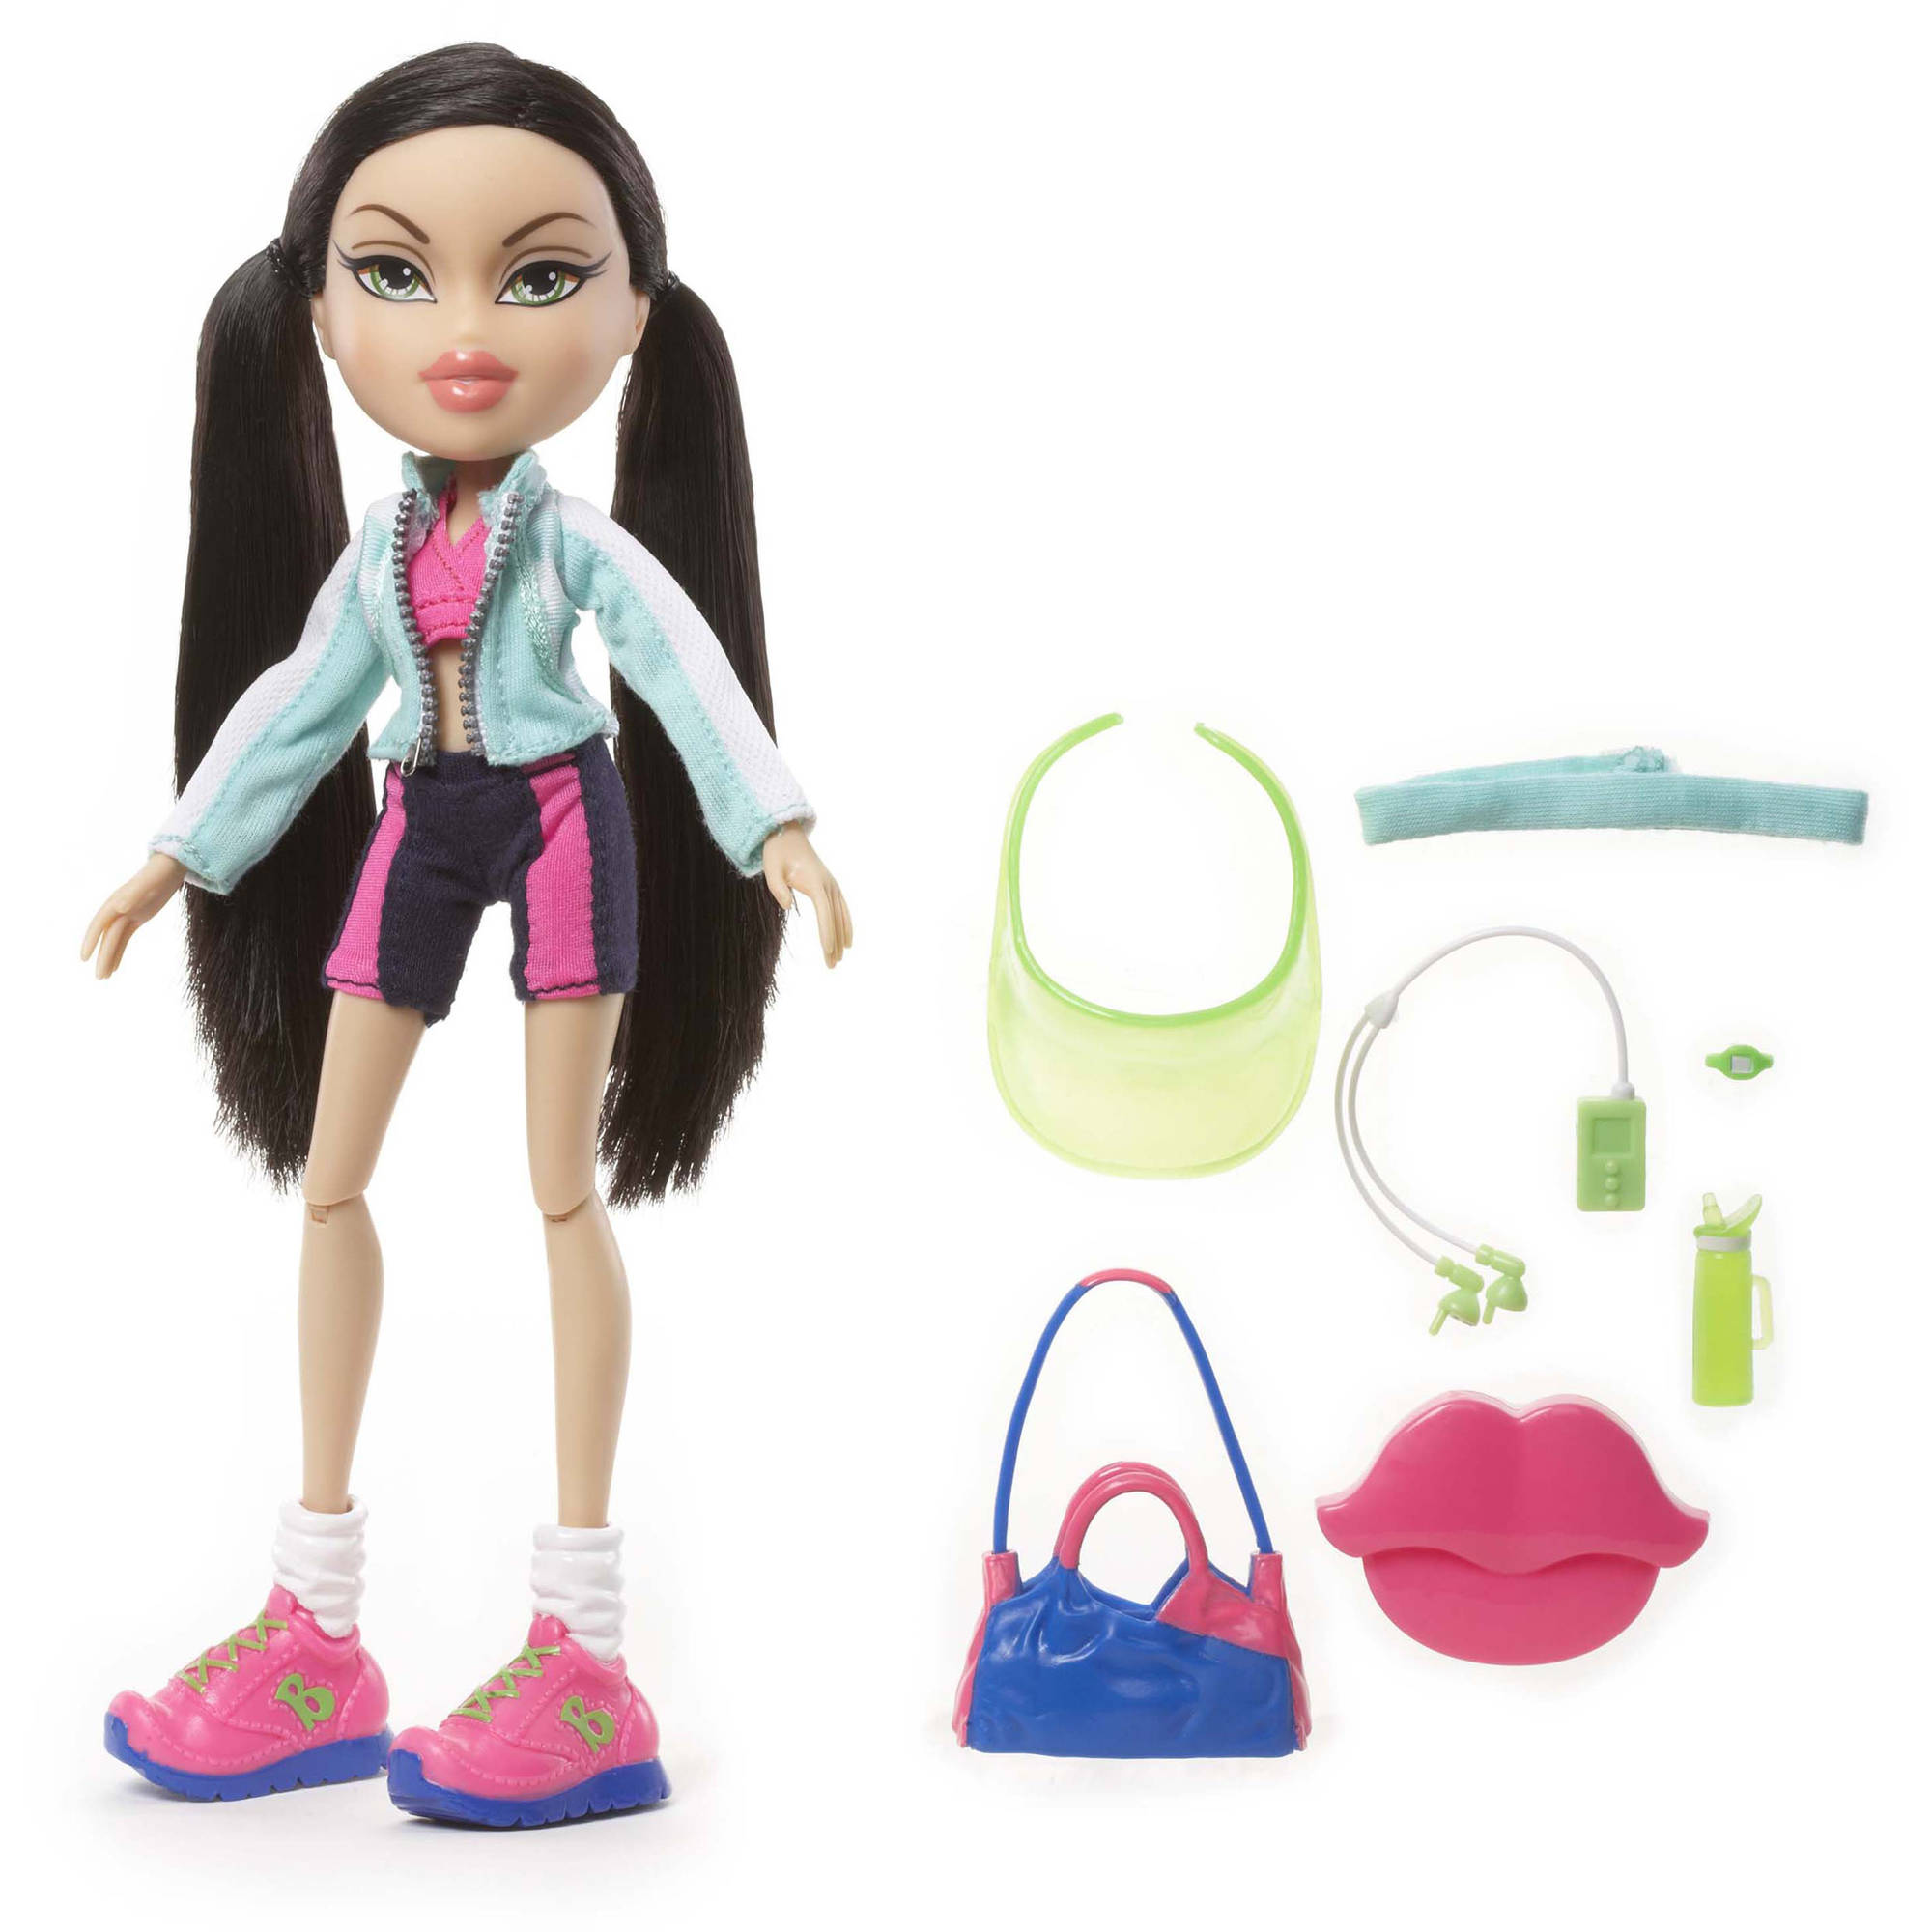 Bratz Fierce Fitness Doll, Jade, Great Gift for Children Ages 6, 7, 8+ - image 1 of 5